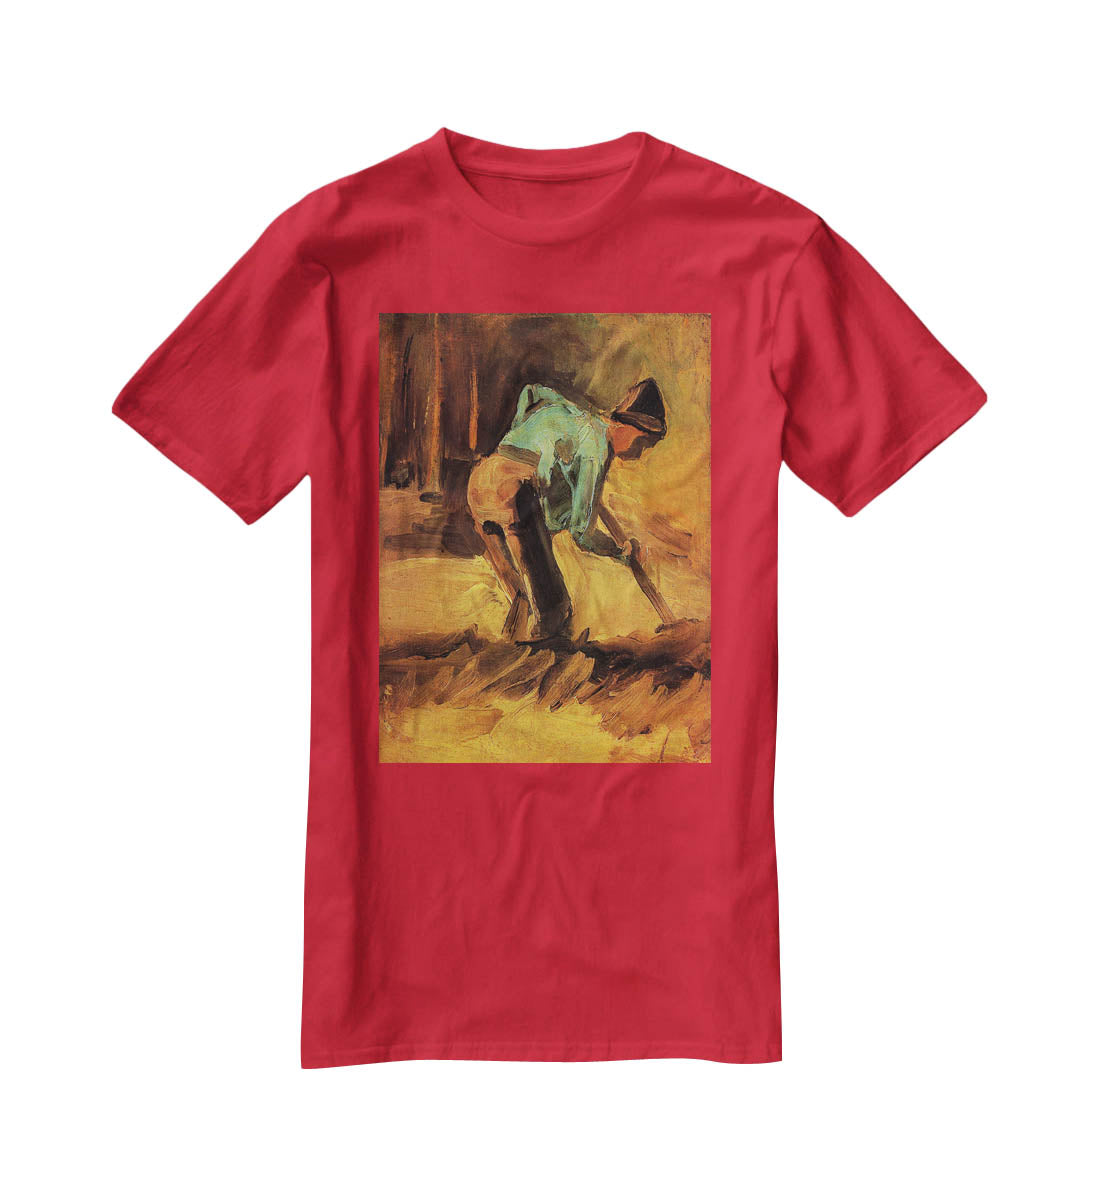 Man Stooping with Stick or Spade by Van Gogh T-Shirt - Canvas Art Rocks - 4